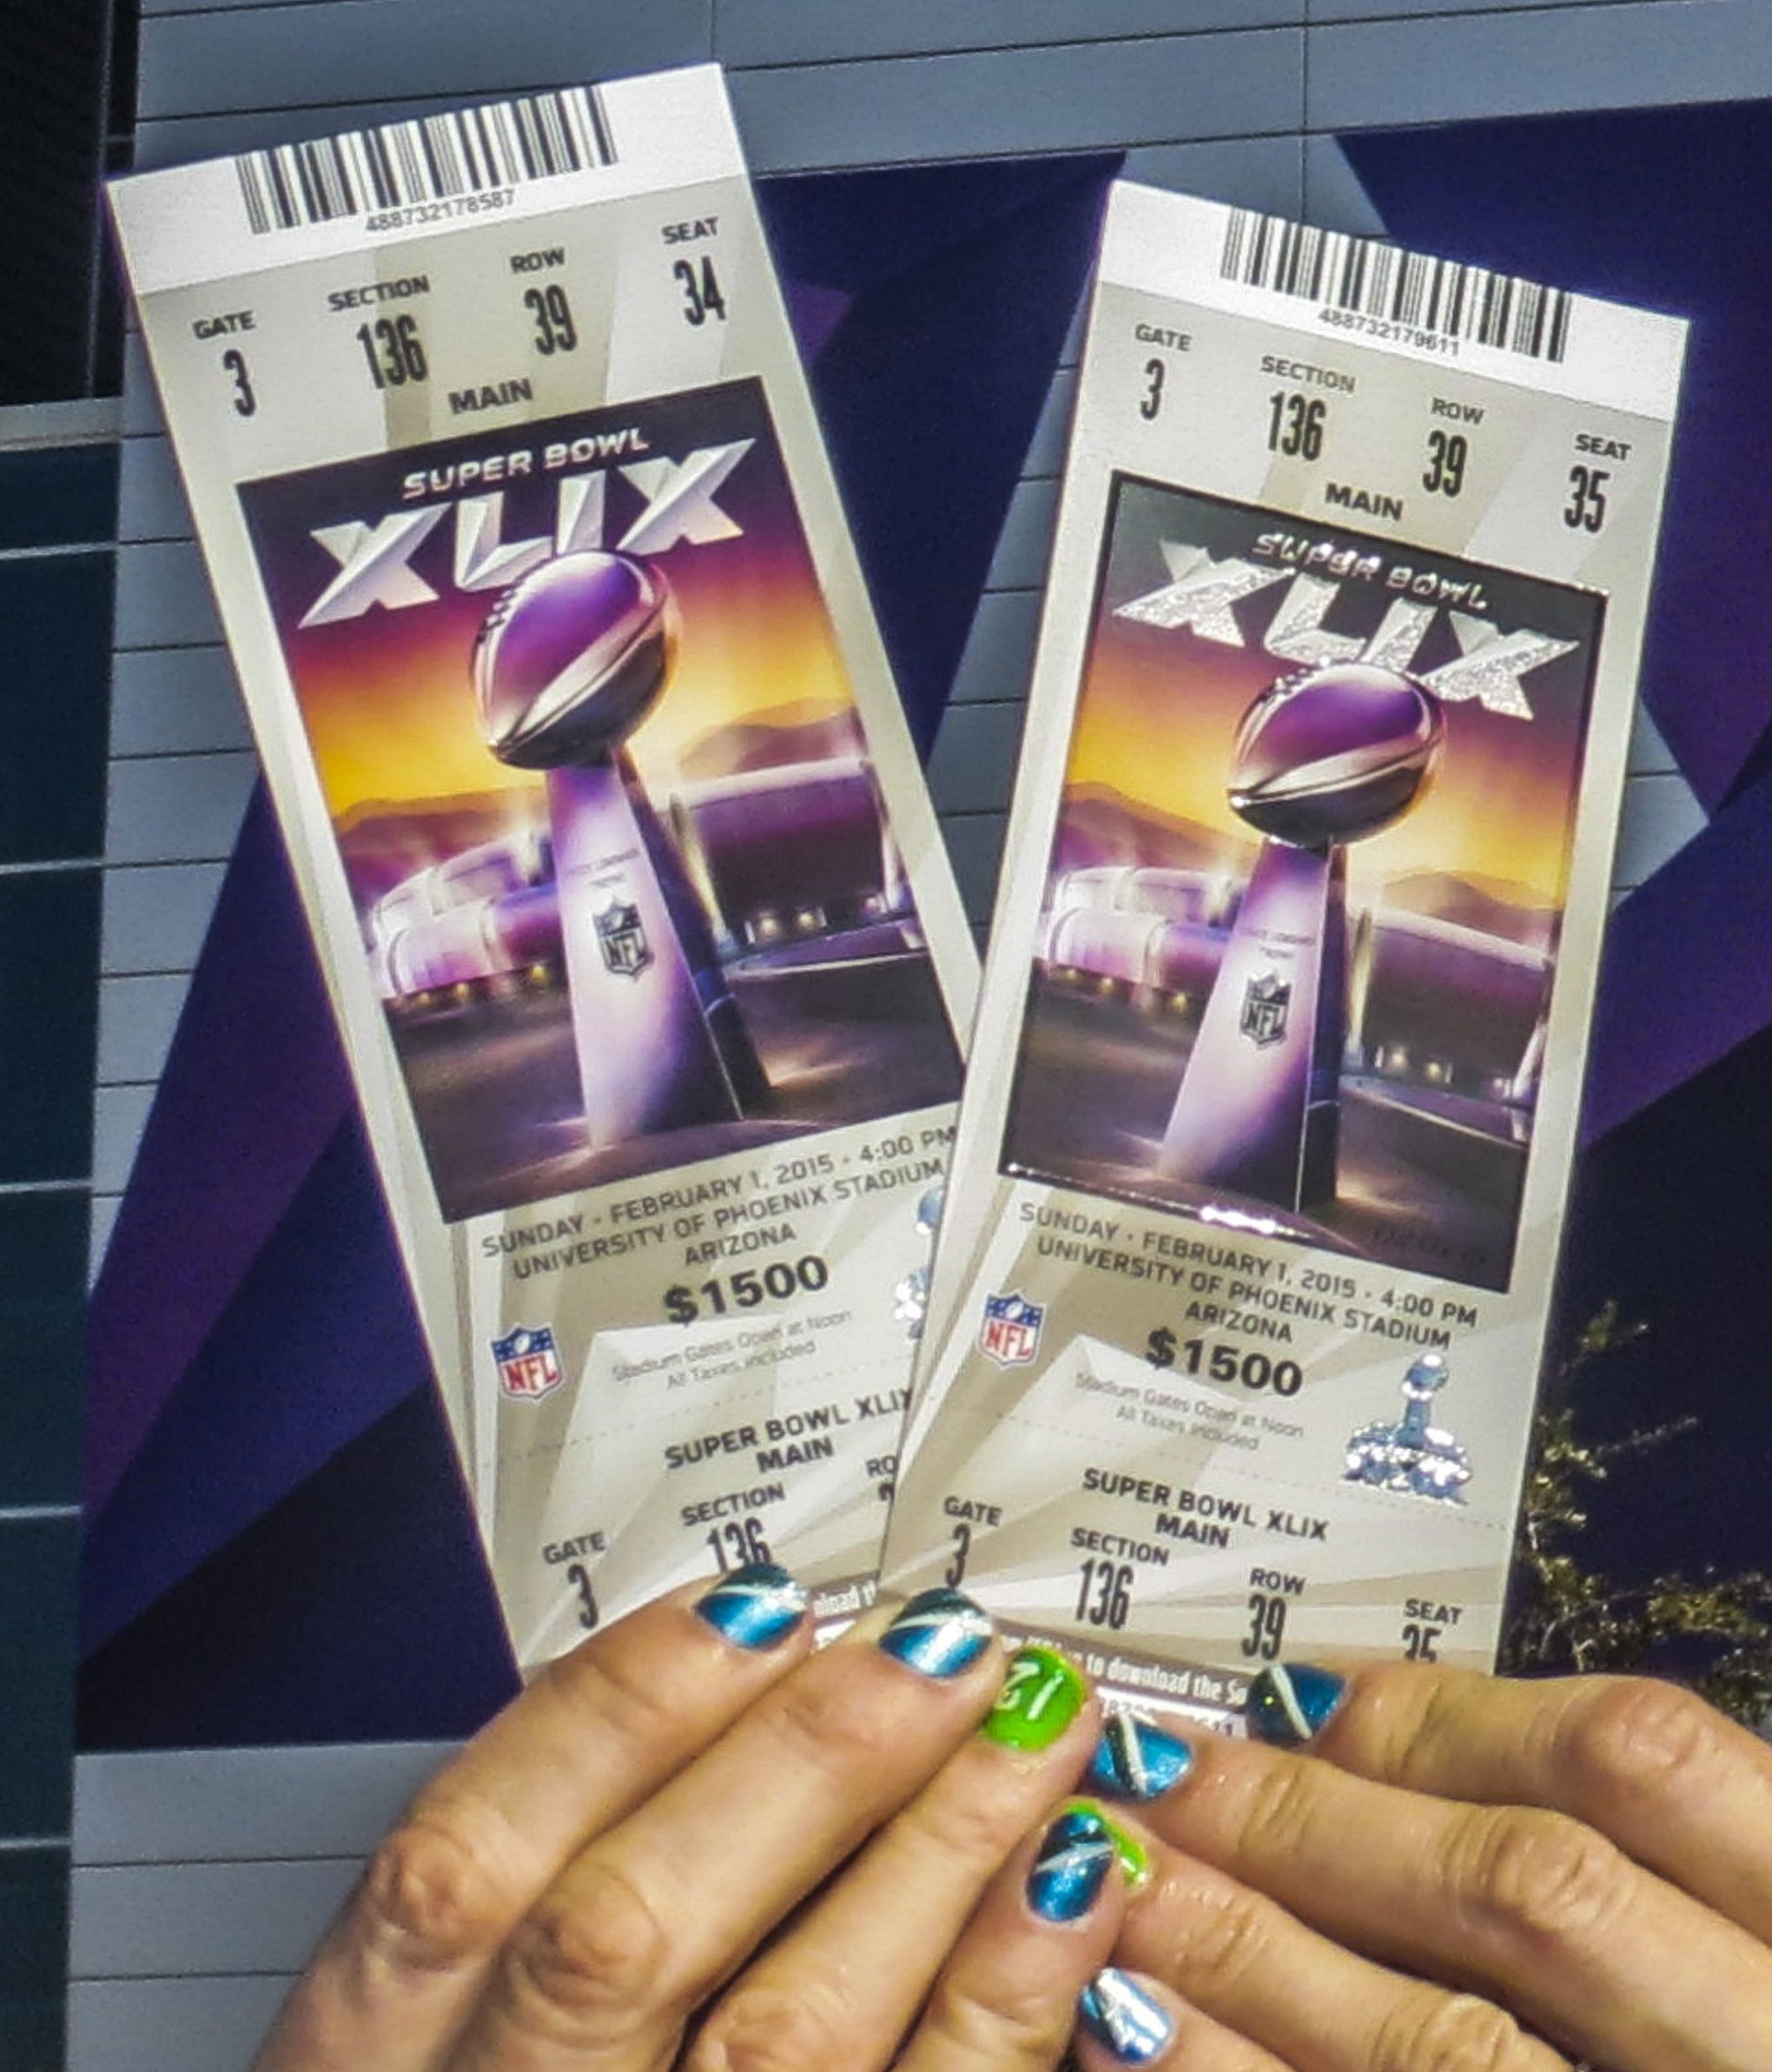 Super Bowl tickets still not sure thing since little has changed with  brokers